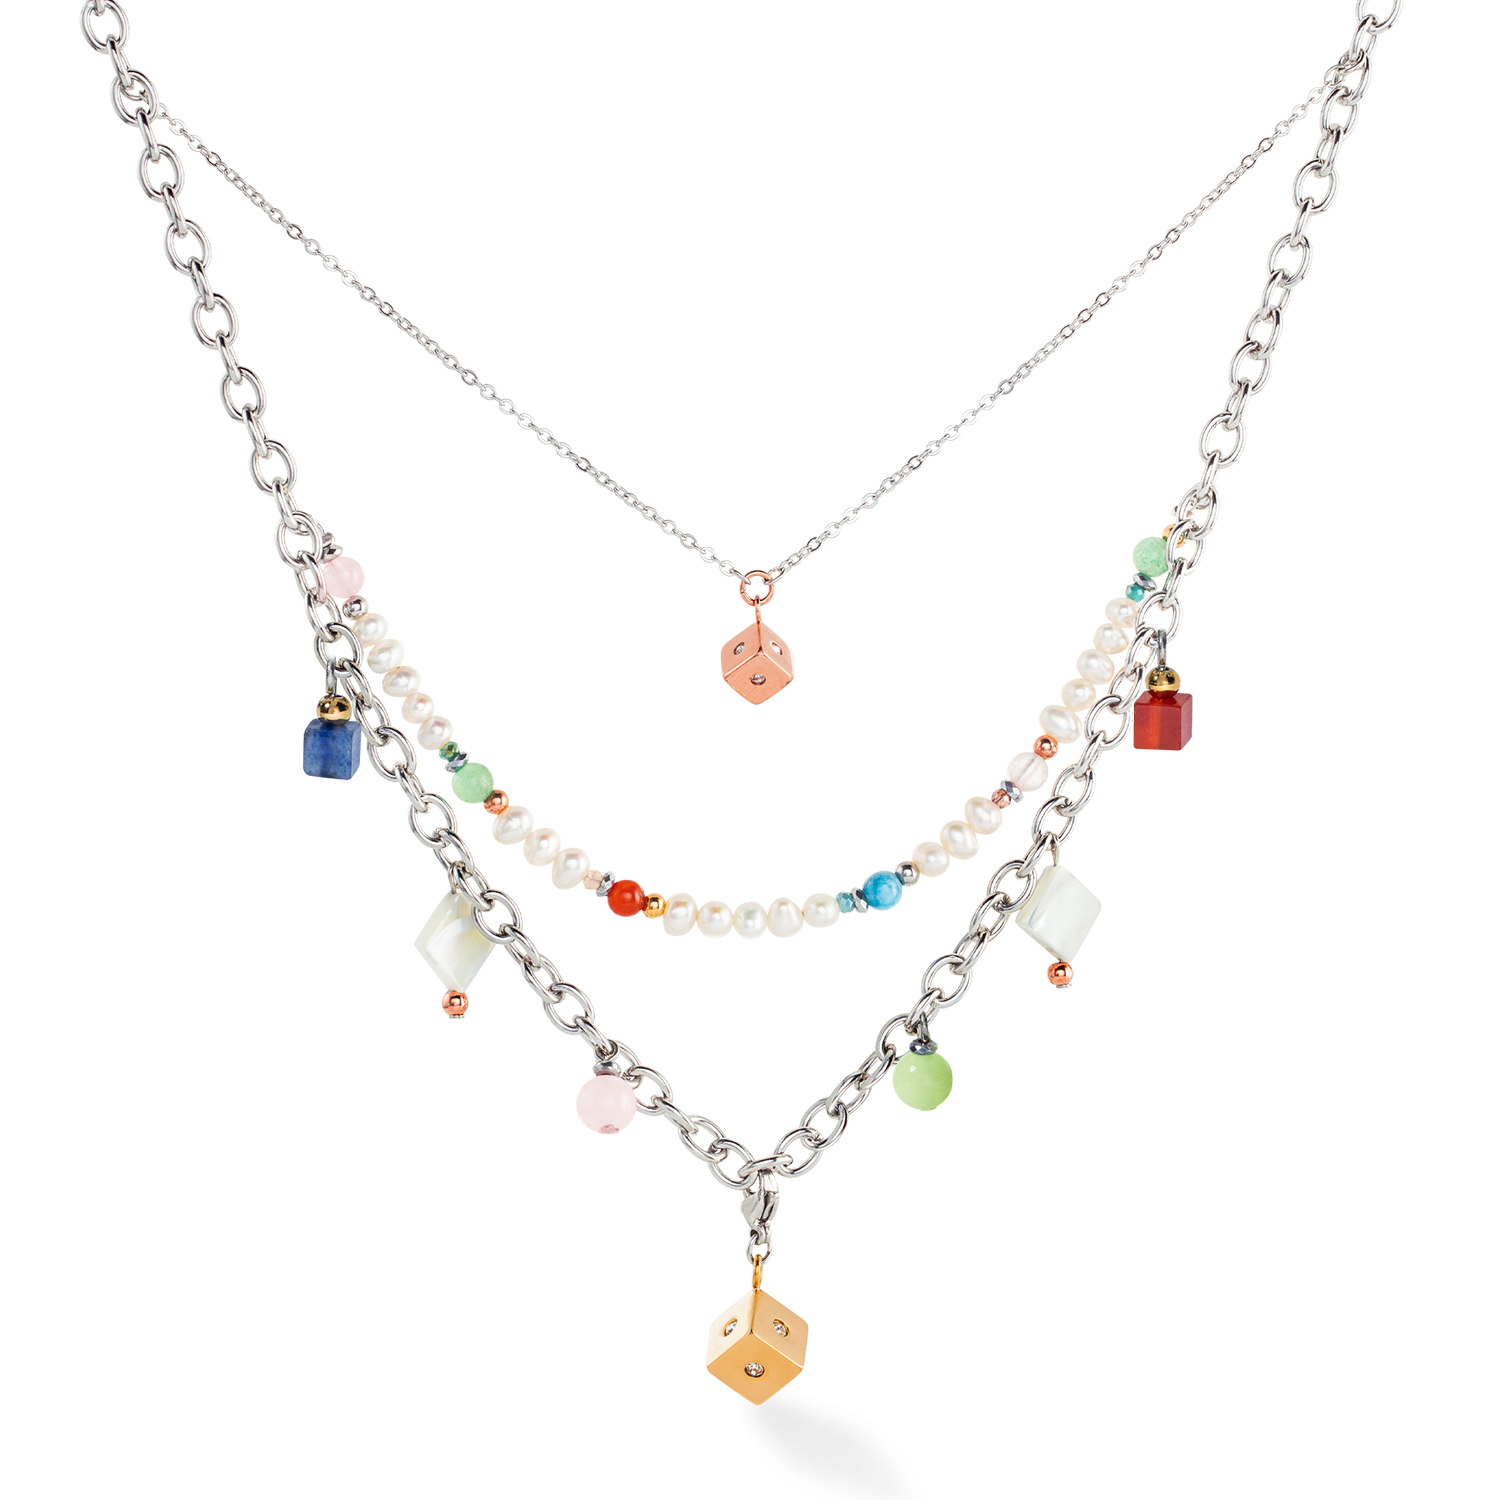 Boho necklace freshwater pearls silver & multicolour